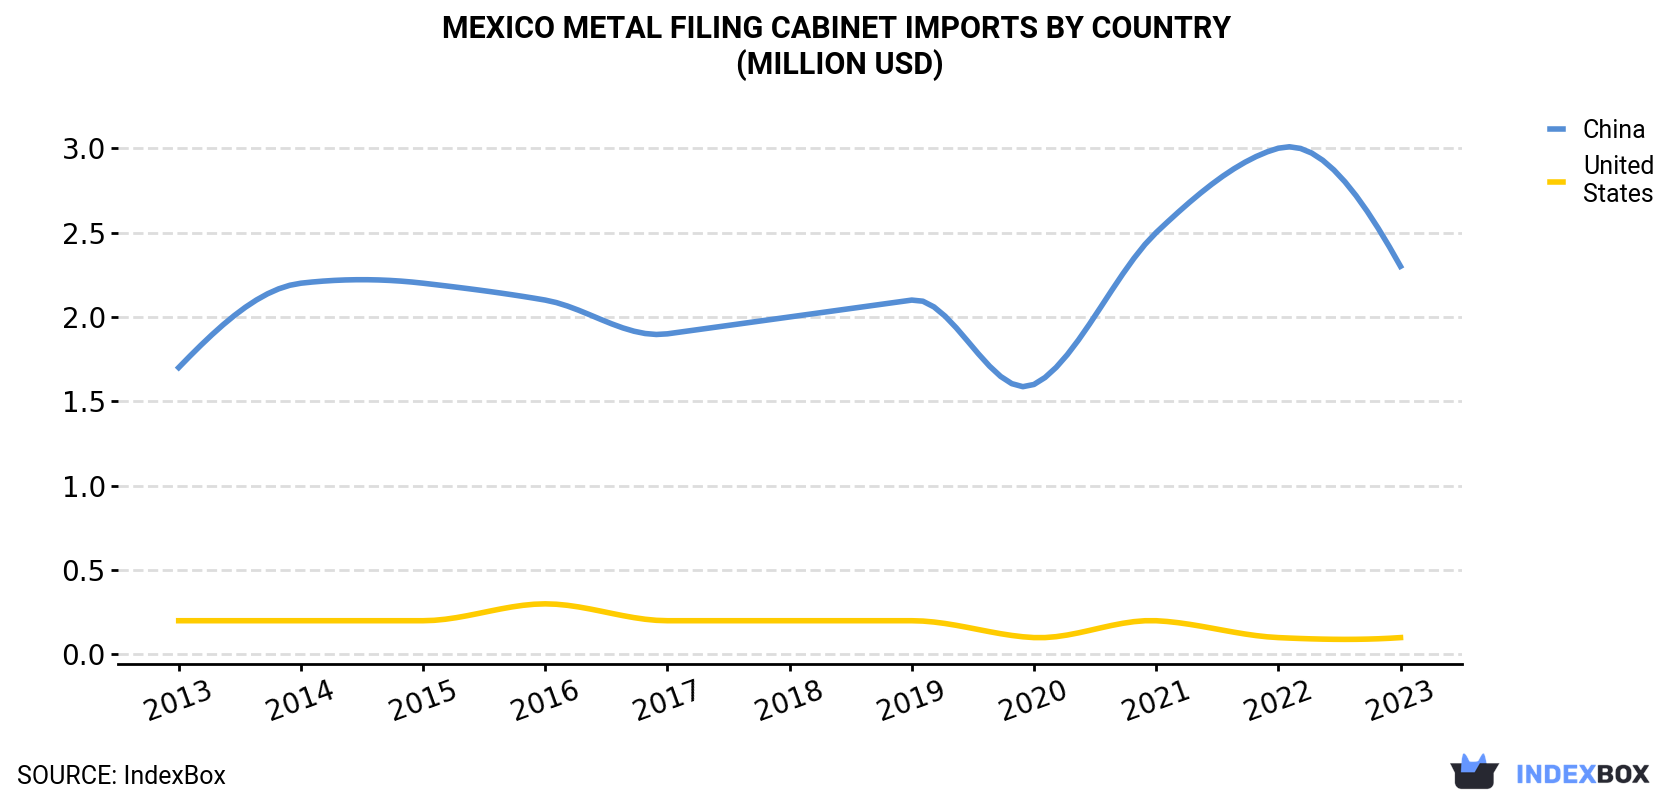 Mexico Metal Filing Cabinet Imports By Country (Million USD)